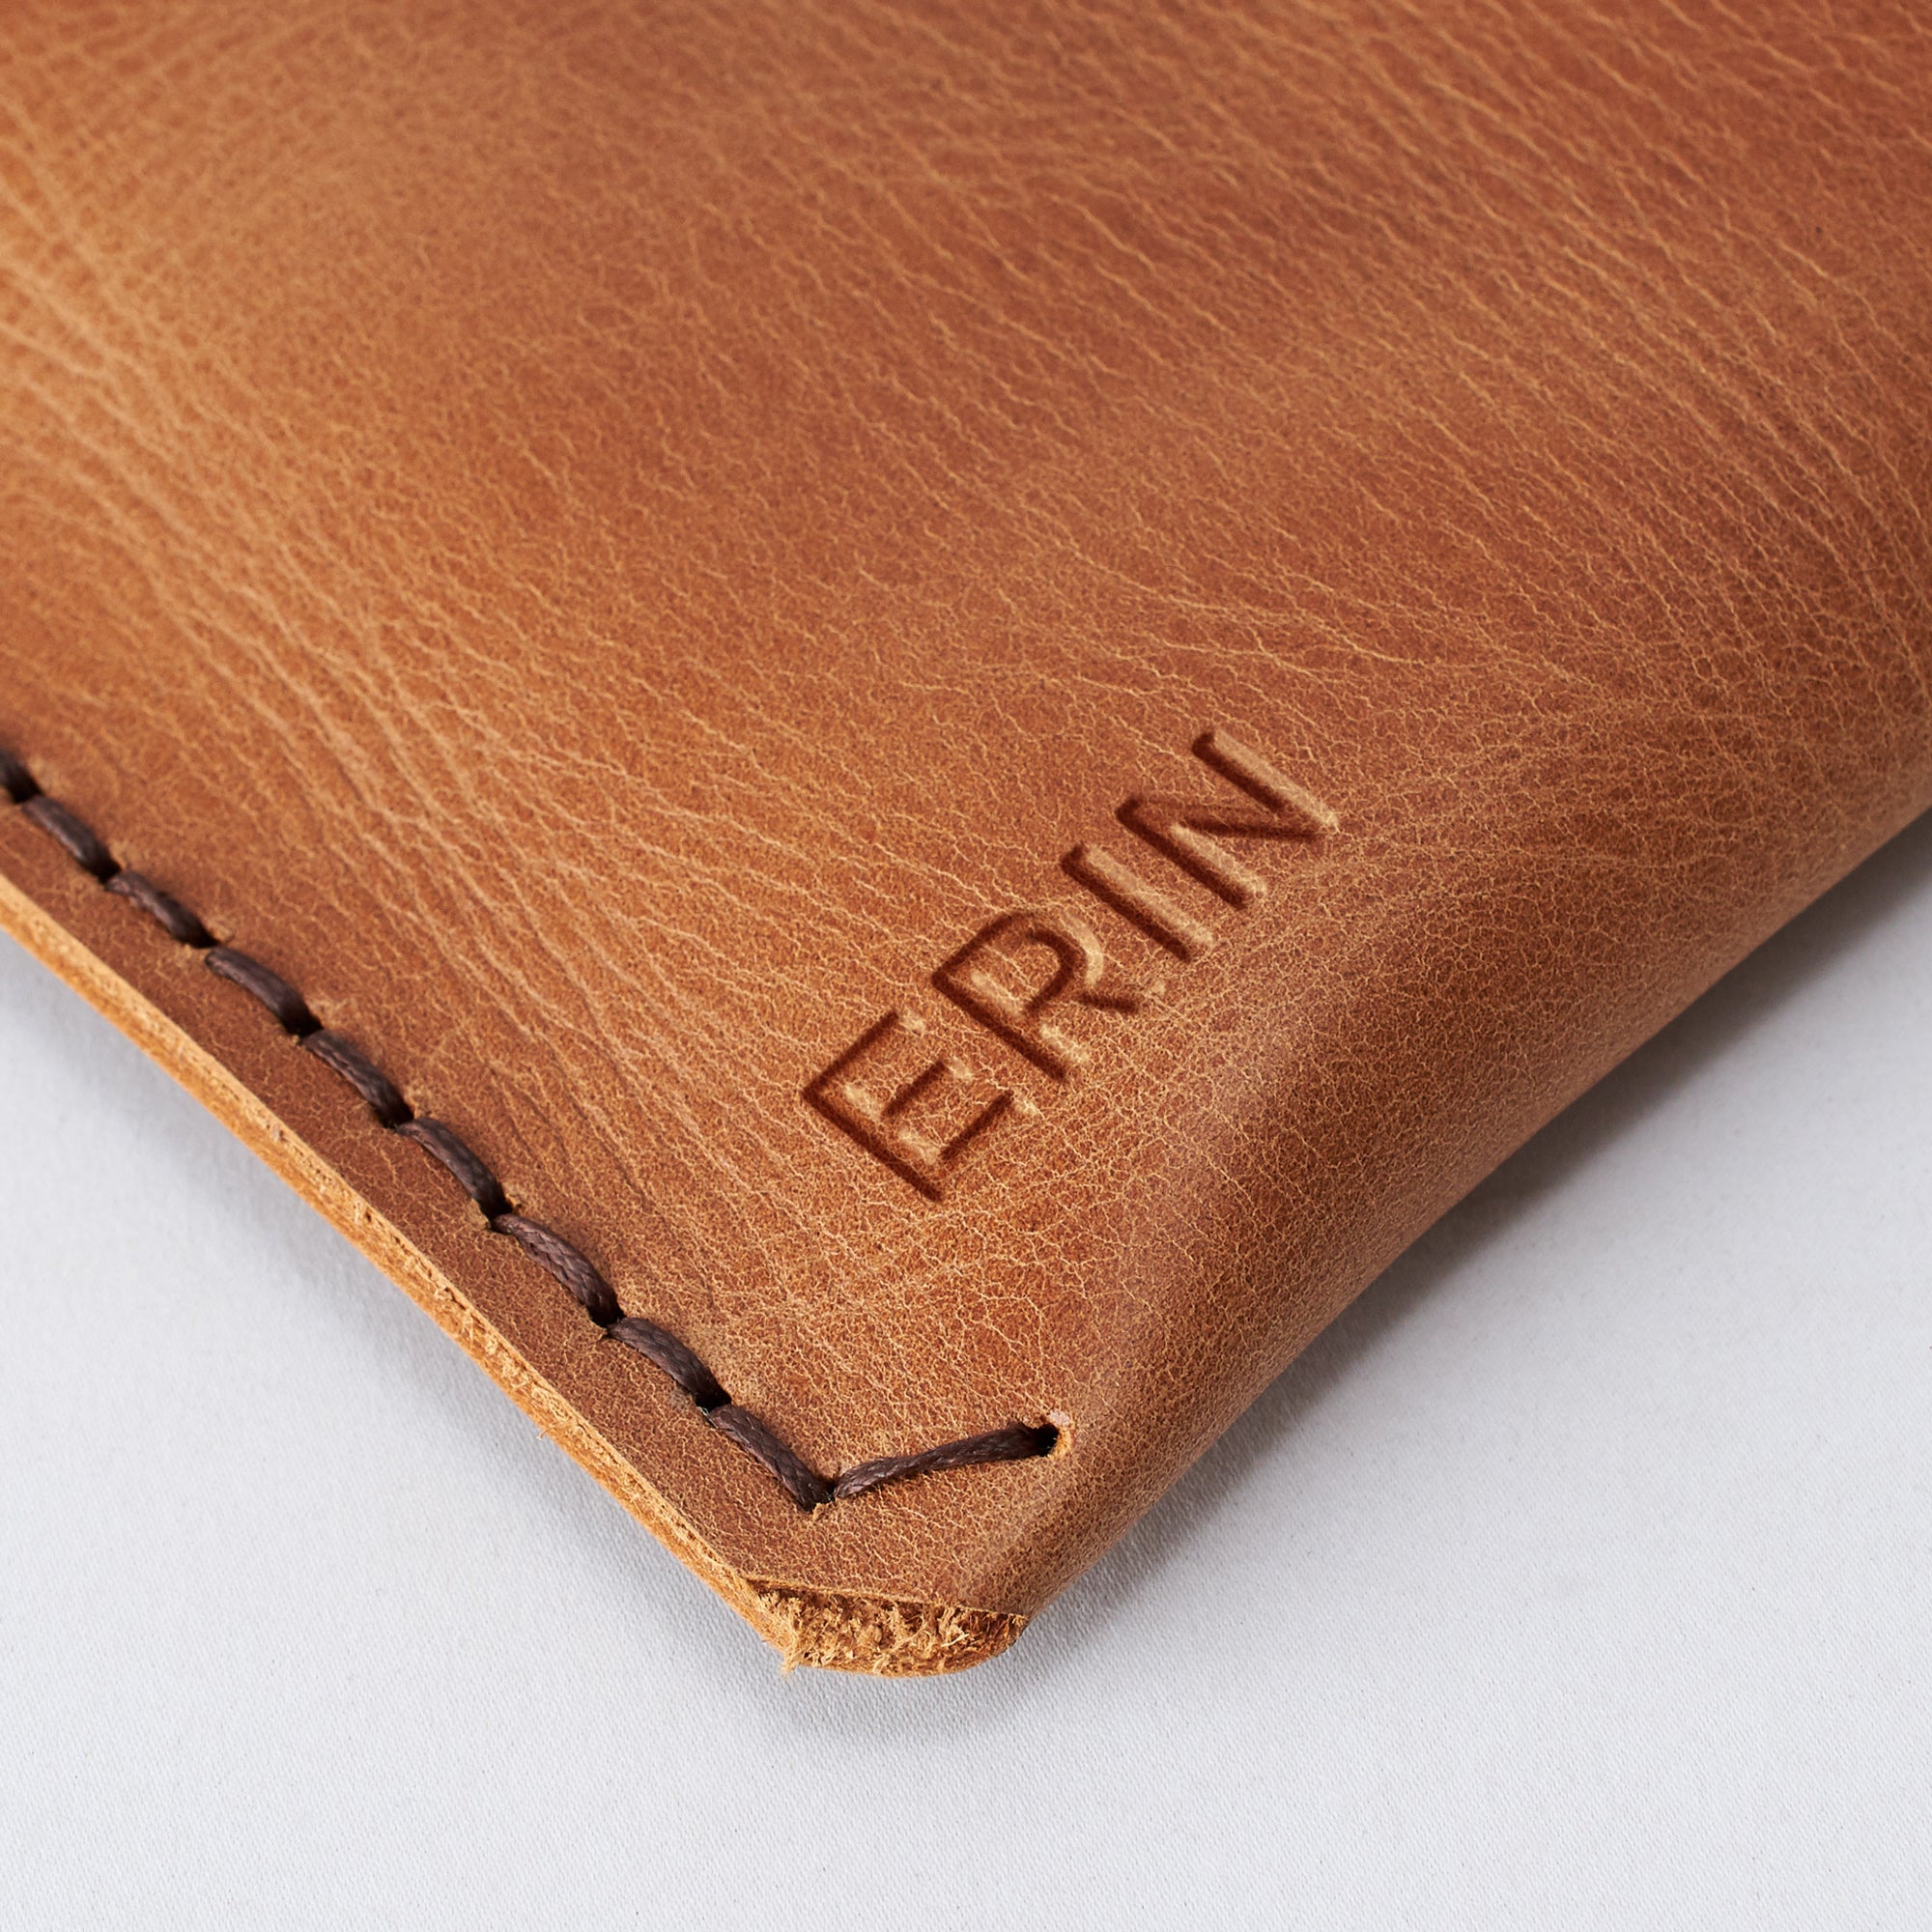 Initials engraving on our leather Dell XPS laptop sleeve